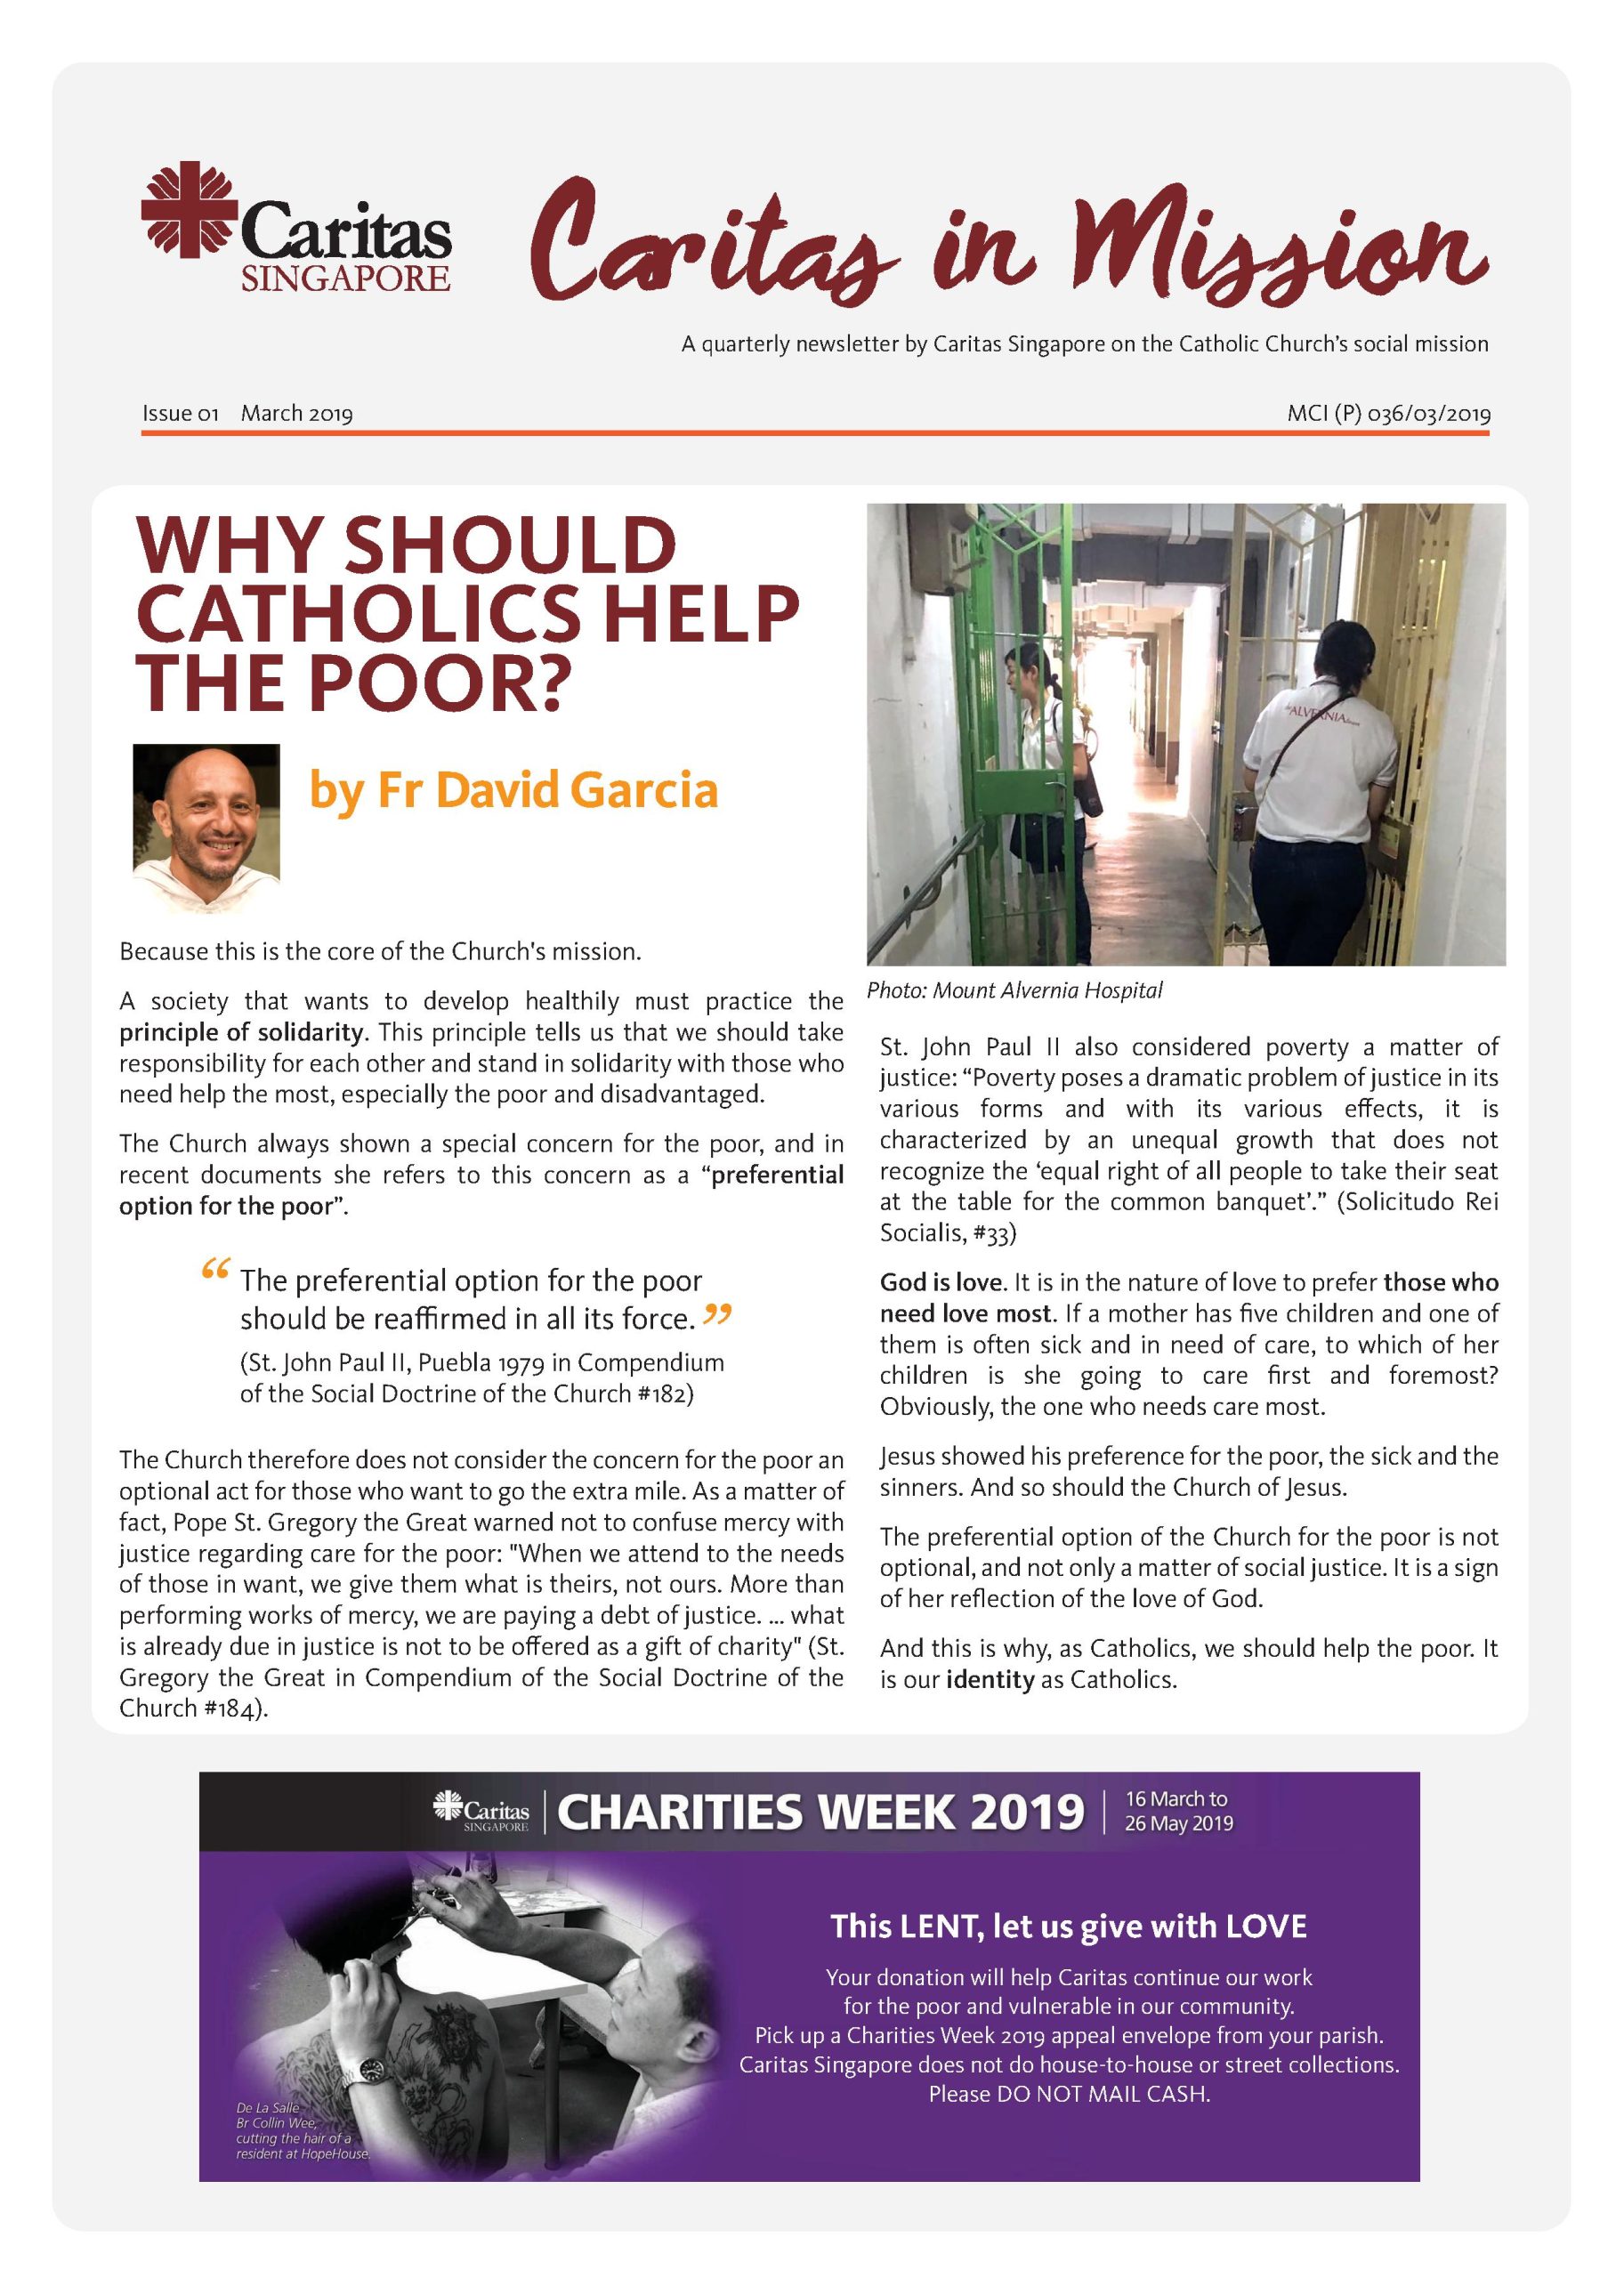 Caritas in Mission Issue 01 March 2019 scaled